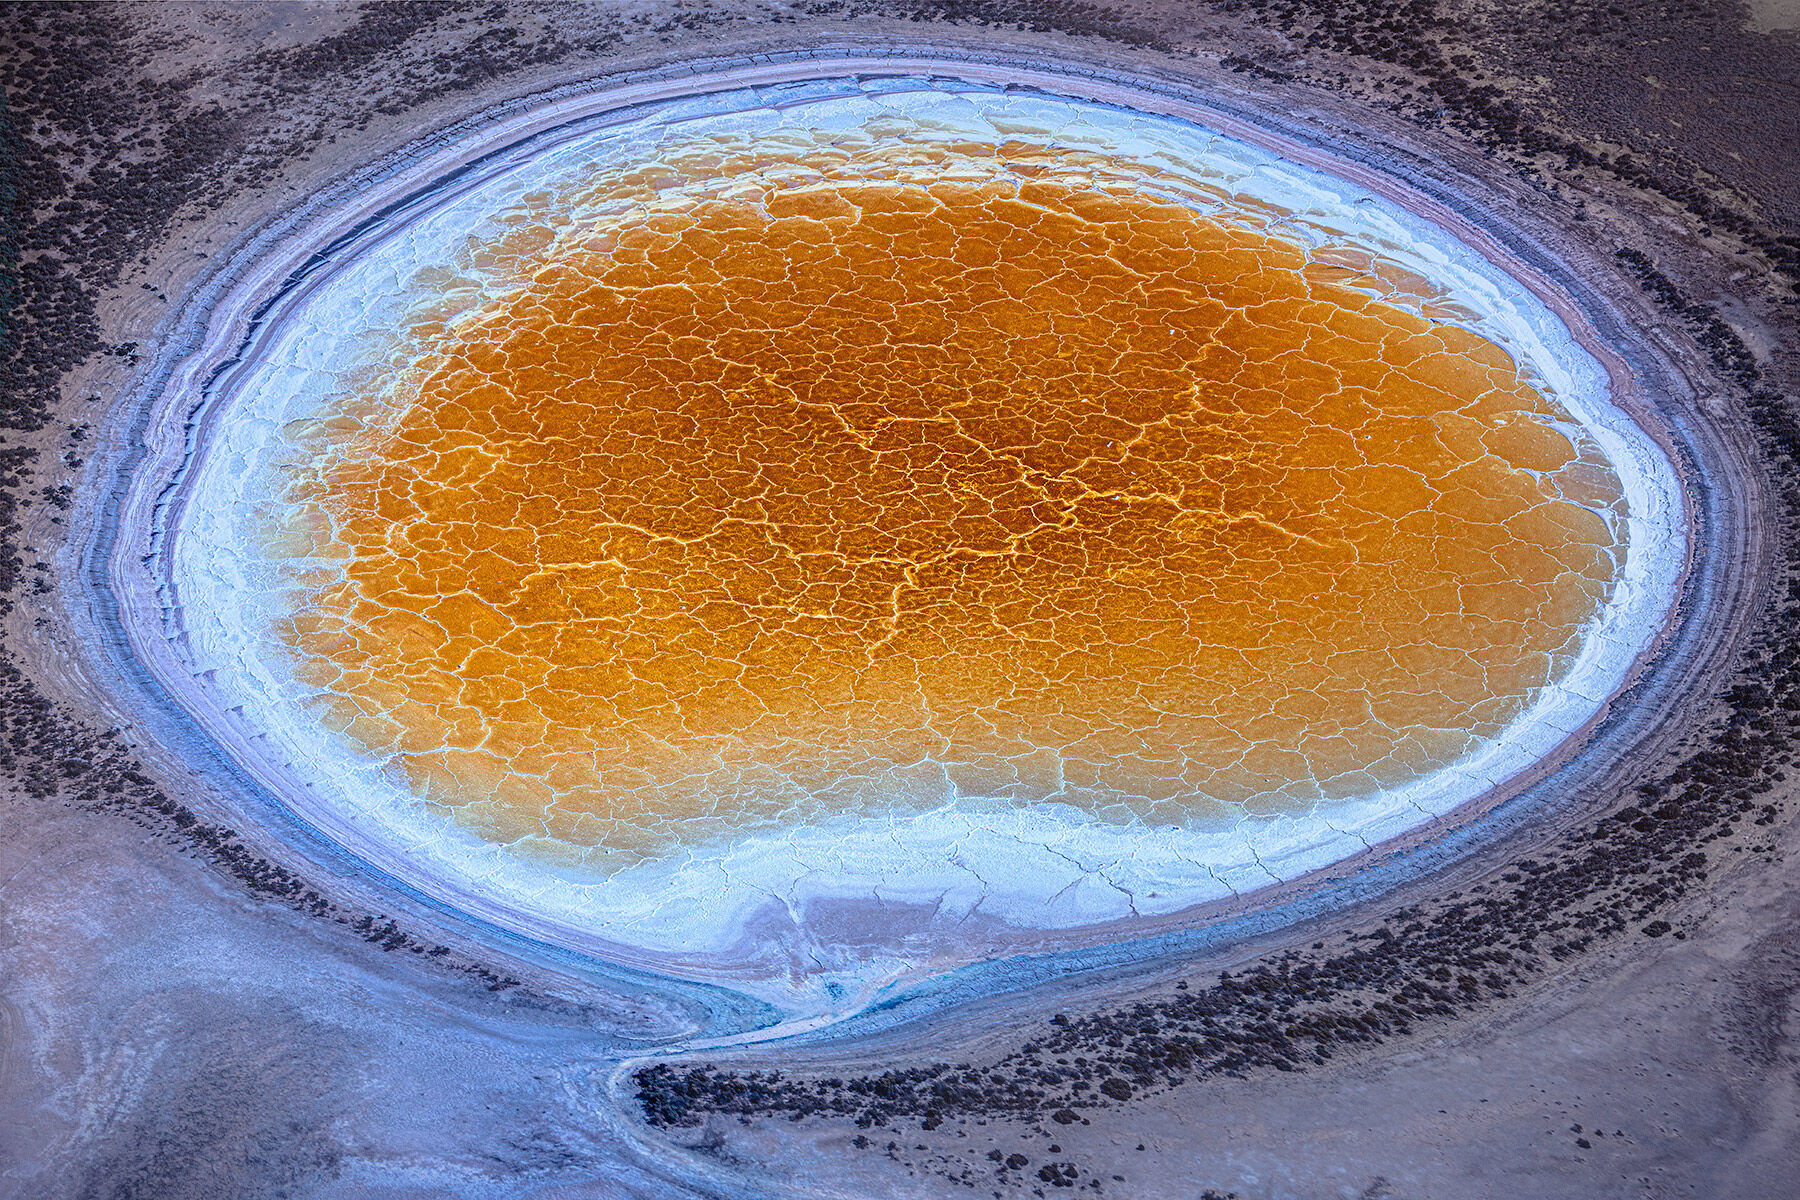 Image 4 of 4 from the amazing salt flats of Australia's SW, stained with an array of mineral colors.